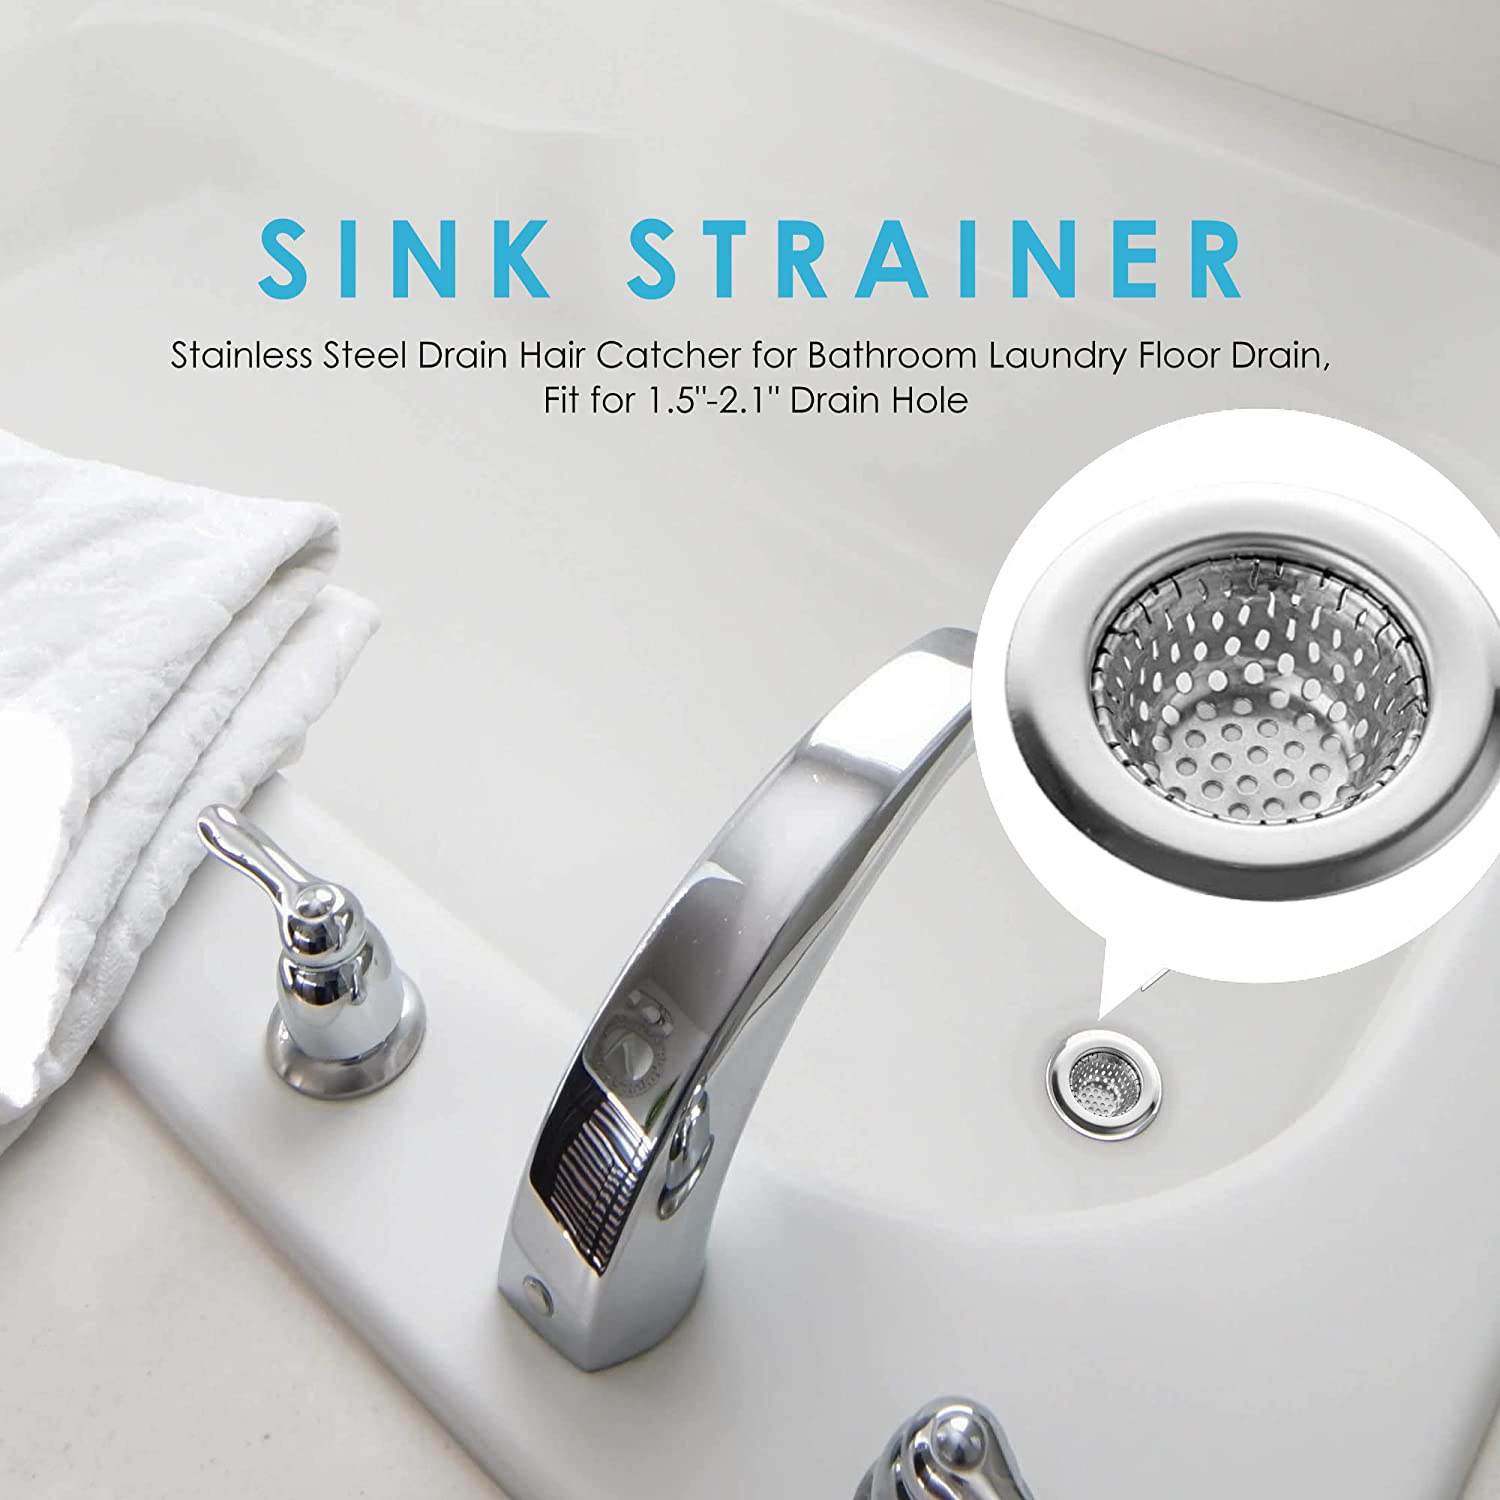 1pc Sink Strainer, Stainless Steel Sink Drain Strainer, Food Catcher,  Anti-Clogging Sewer Filter, Bathroom Drain Stopper, Classic Bathtub Water  Stopper For Bathroom